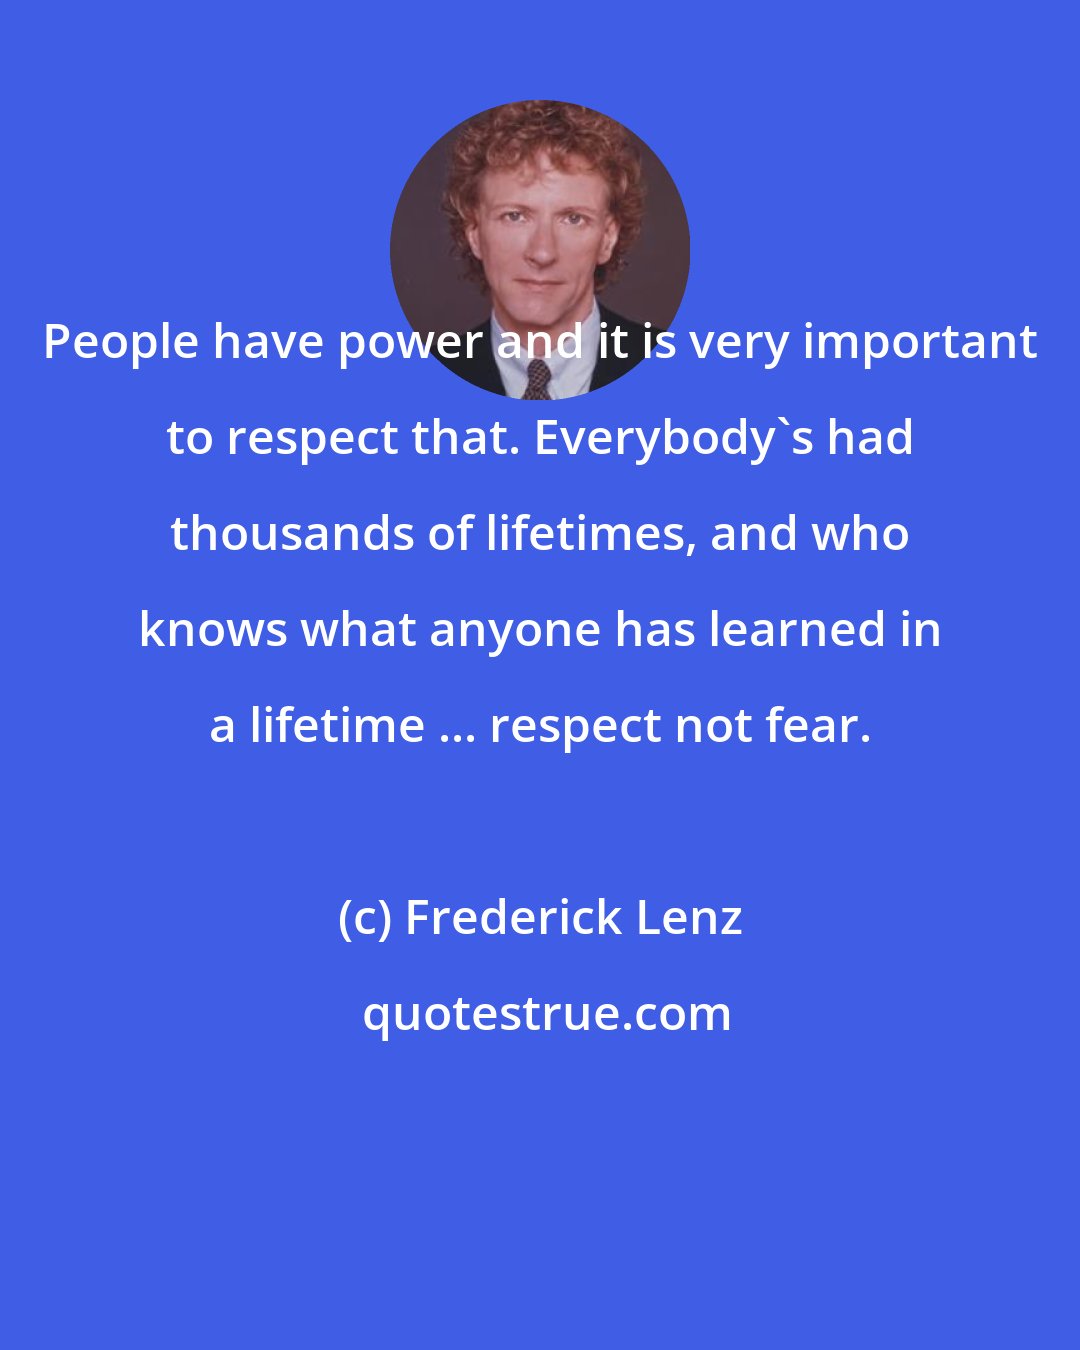 Frederick Lenz: People have power and it is very important to respect that. Everybody's had thousands of lifetimes, and who knows what anyone has learned in a lifetime ... respect not fear.